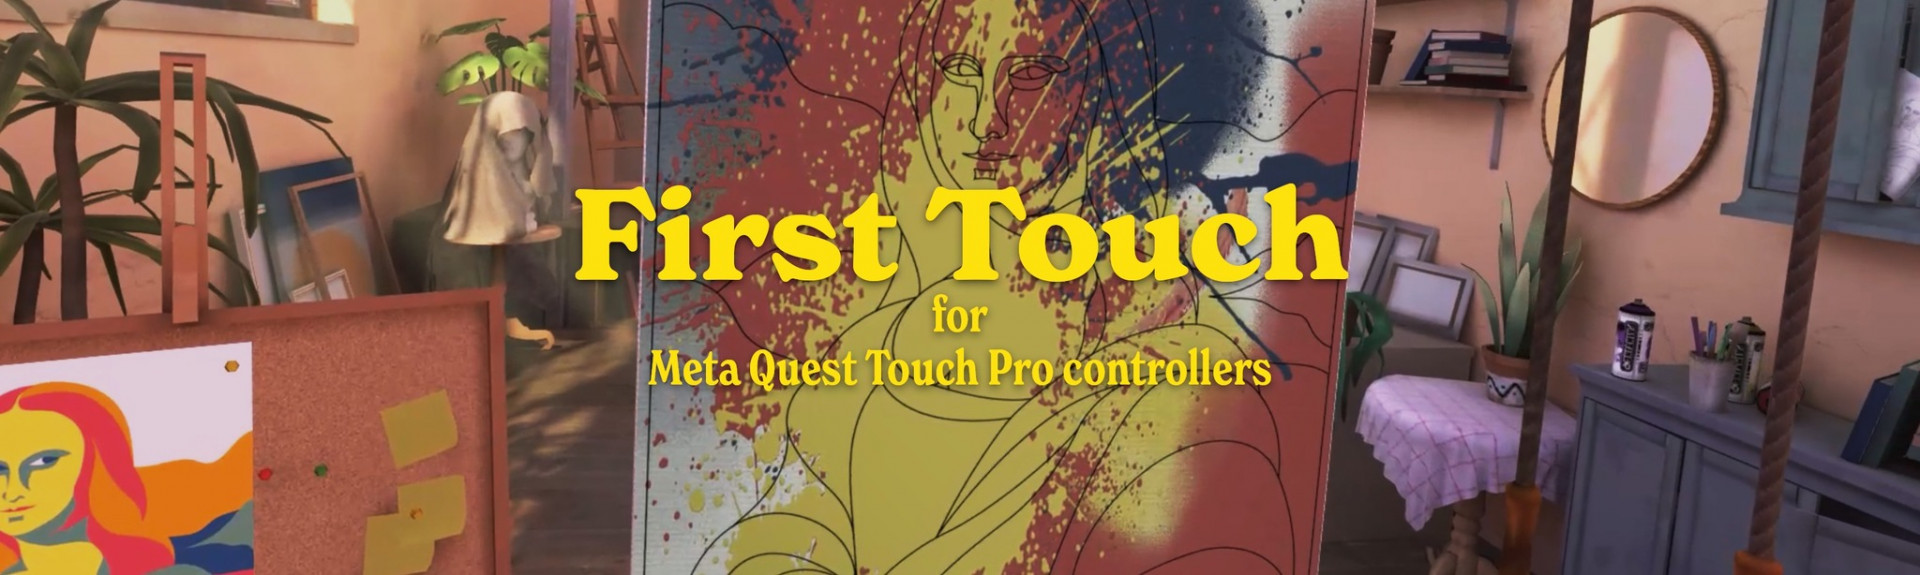 First Touch for Meta Quest Touch Pro controllers